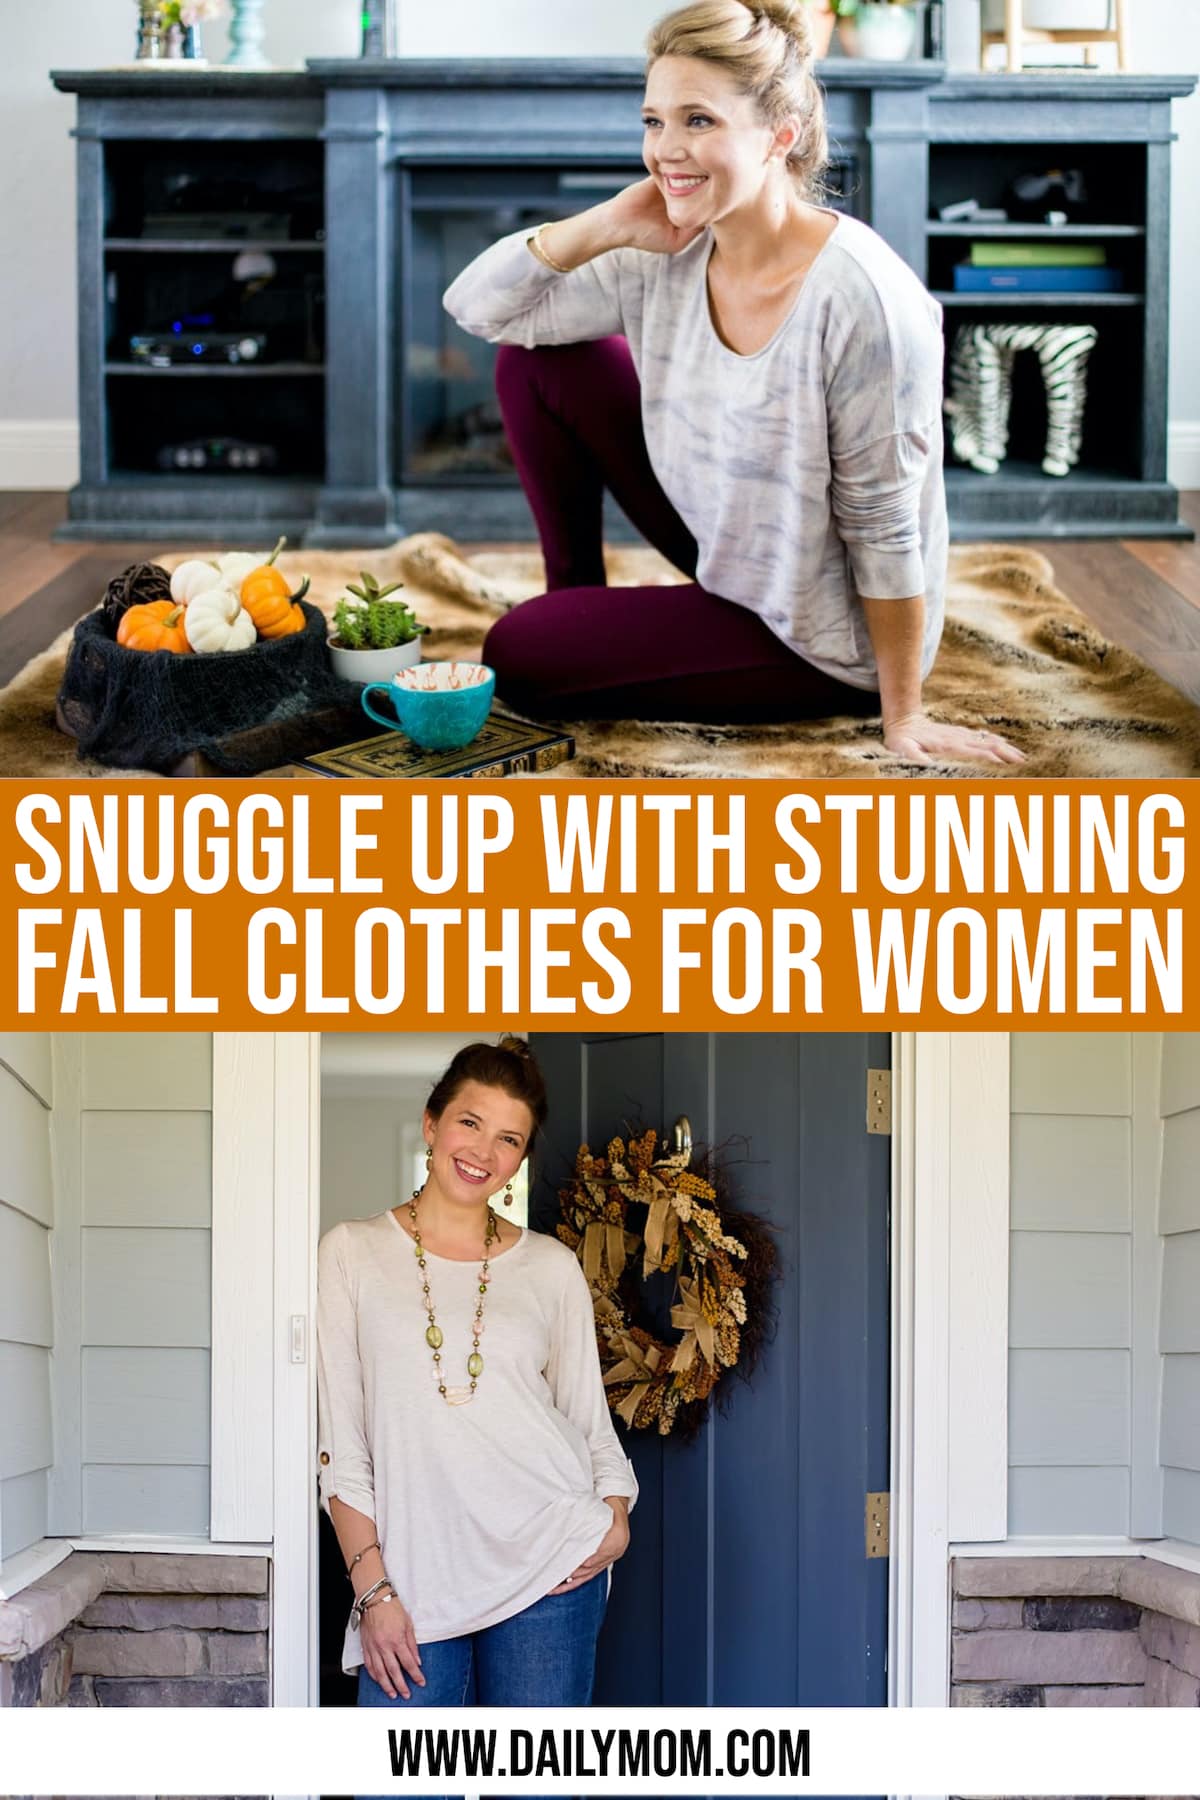 Snuggle Up With Stunning Fall Clothes For Women ❤